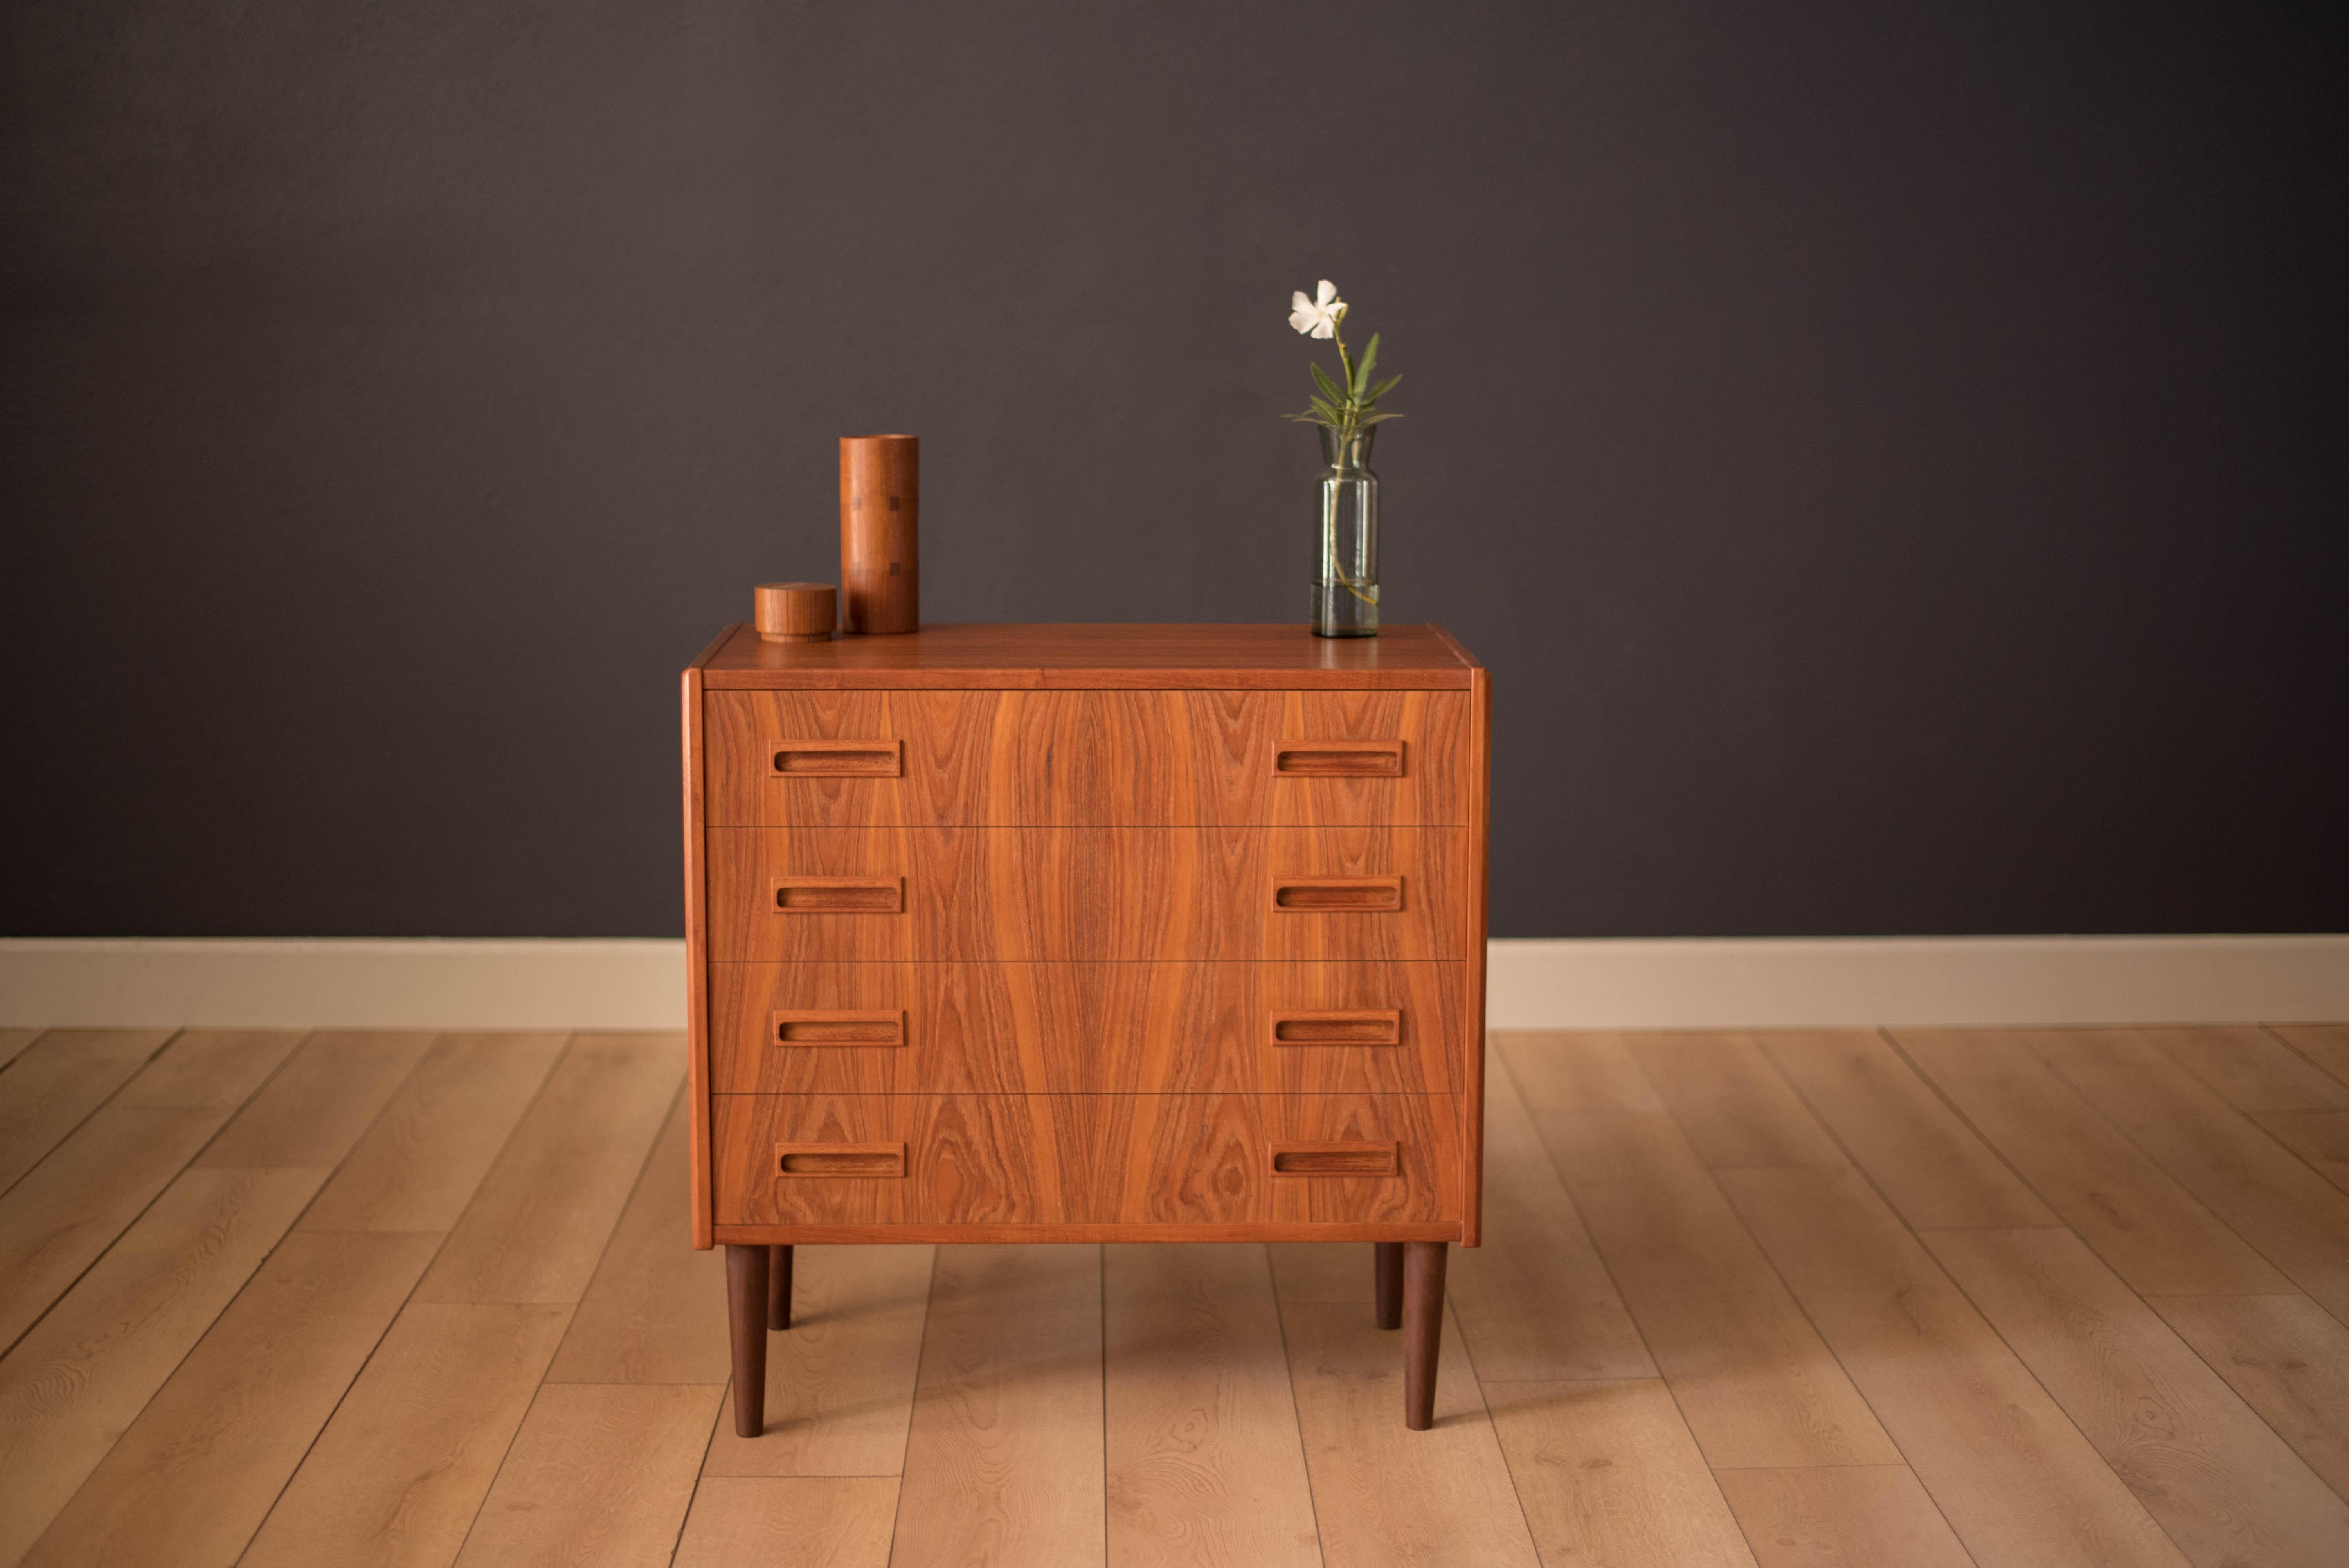 Mid-Century Modern dresser chest by Børge Seindal for P. Westergaards Møbelfabrik in teak. This piece includes four dovetailed drawers with unique sculpted handles. Features a flowing teak grain facade and Classic dowel legs. A functional small